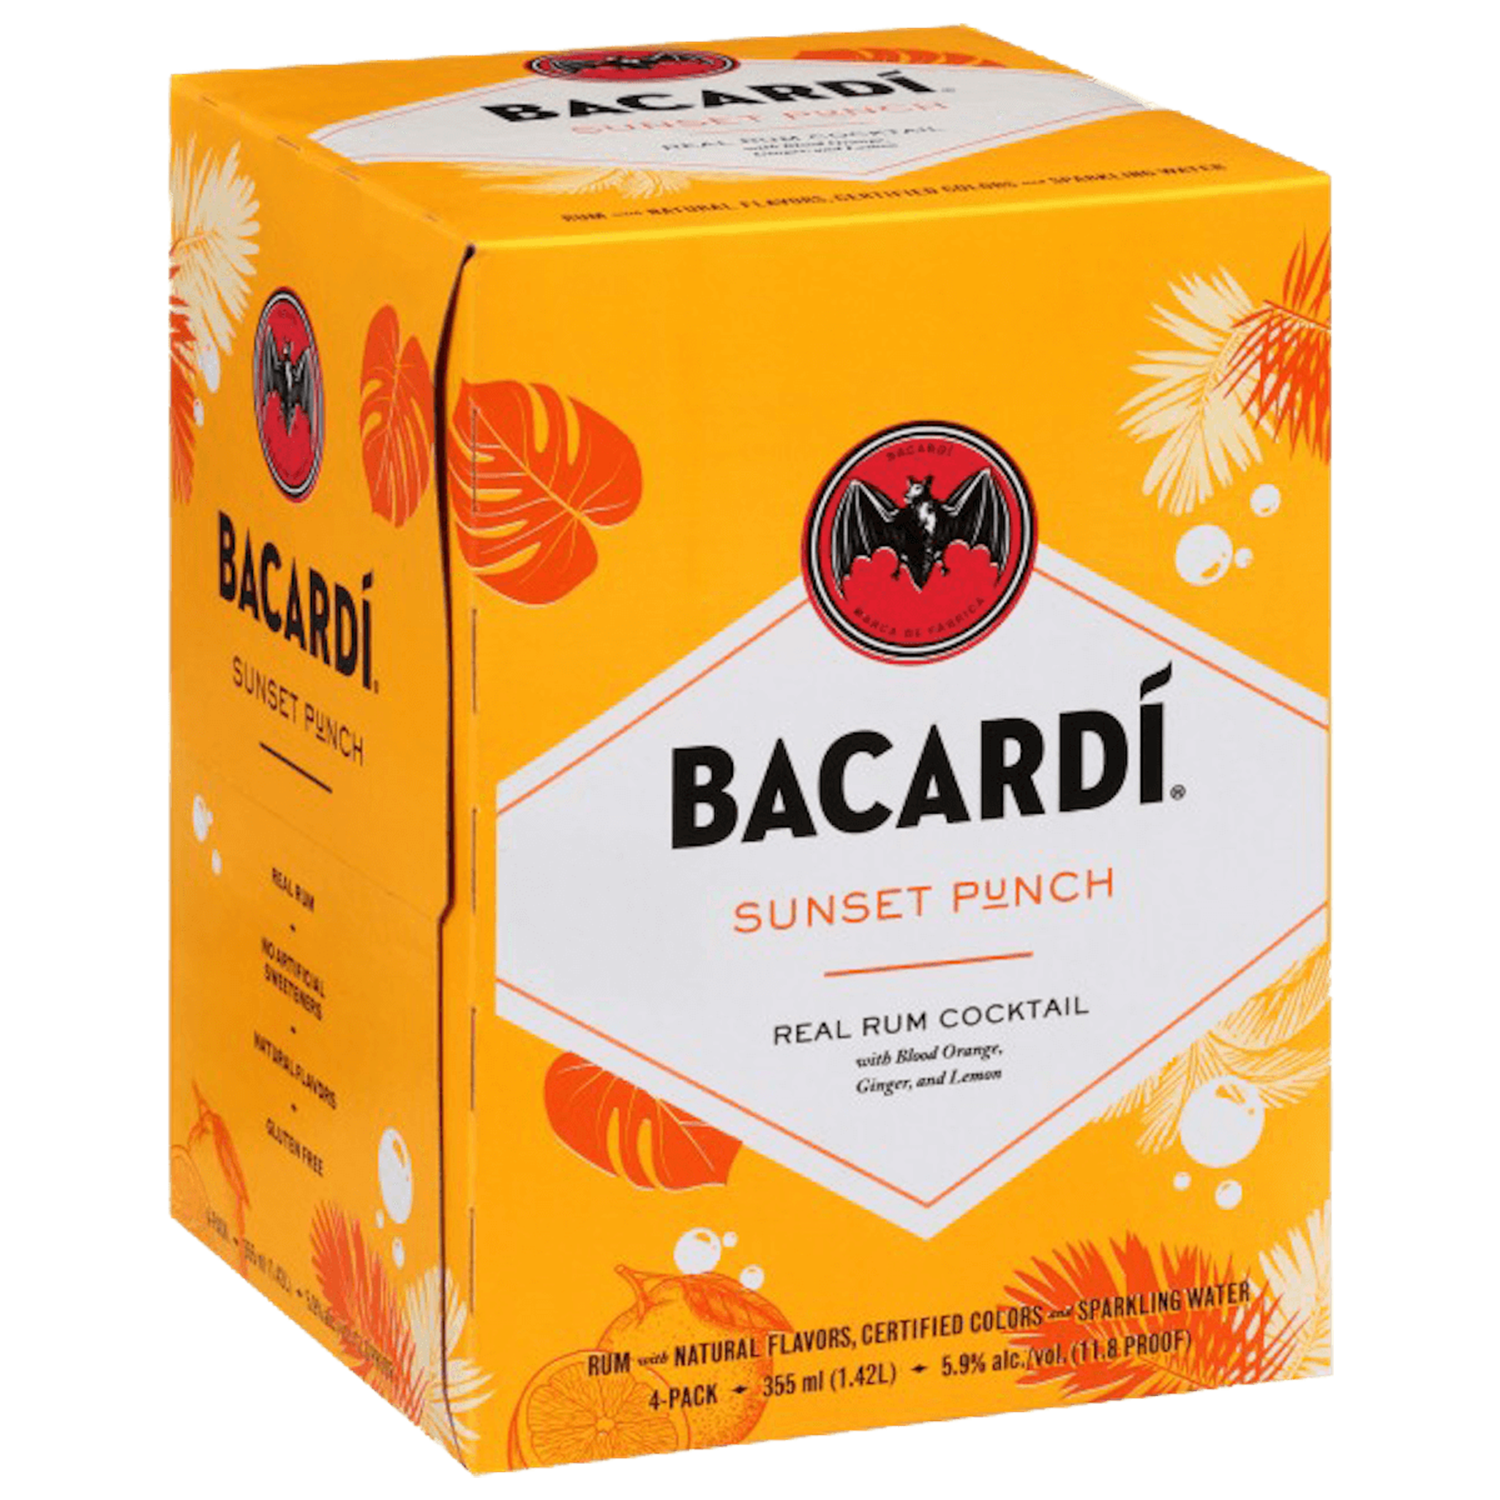 Bacardí Sunset Punch Cocktail (4 Pack)